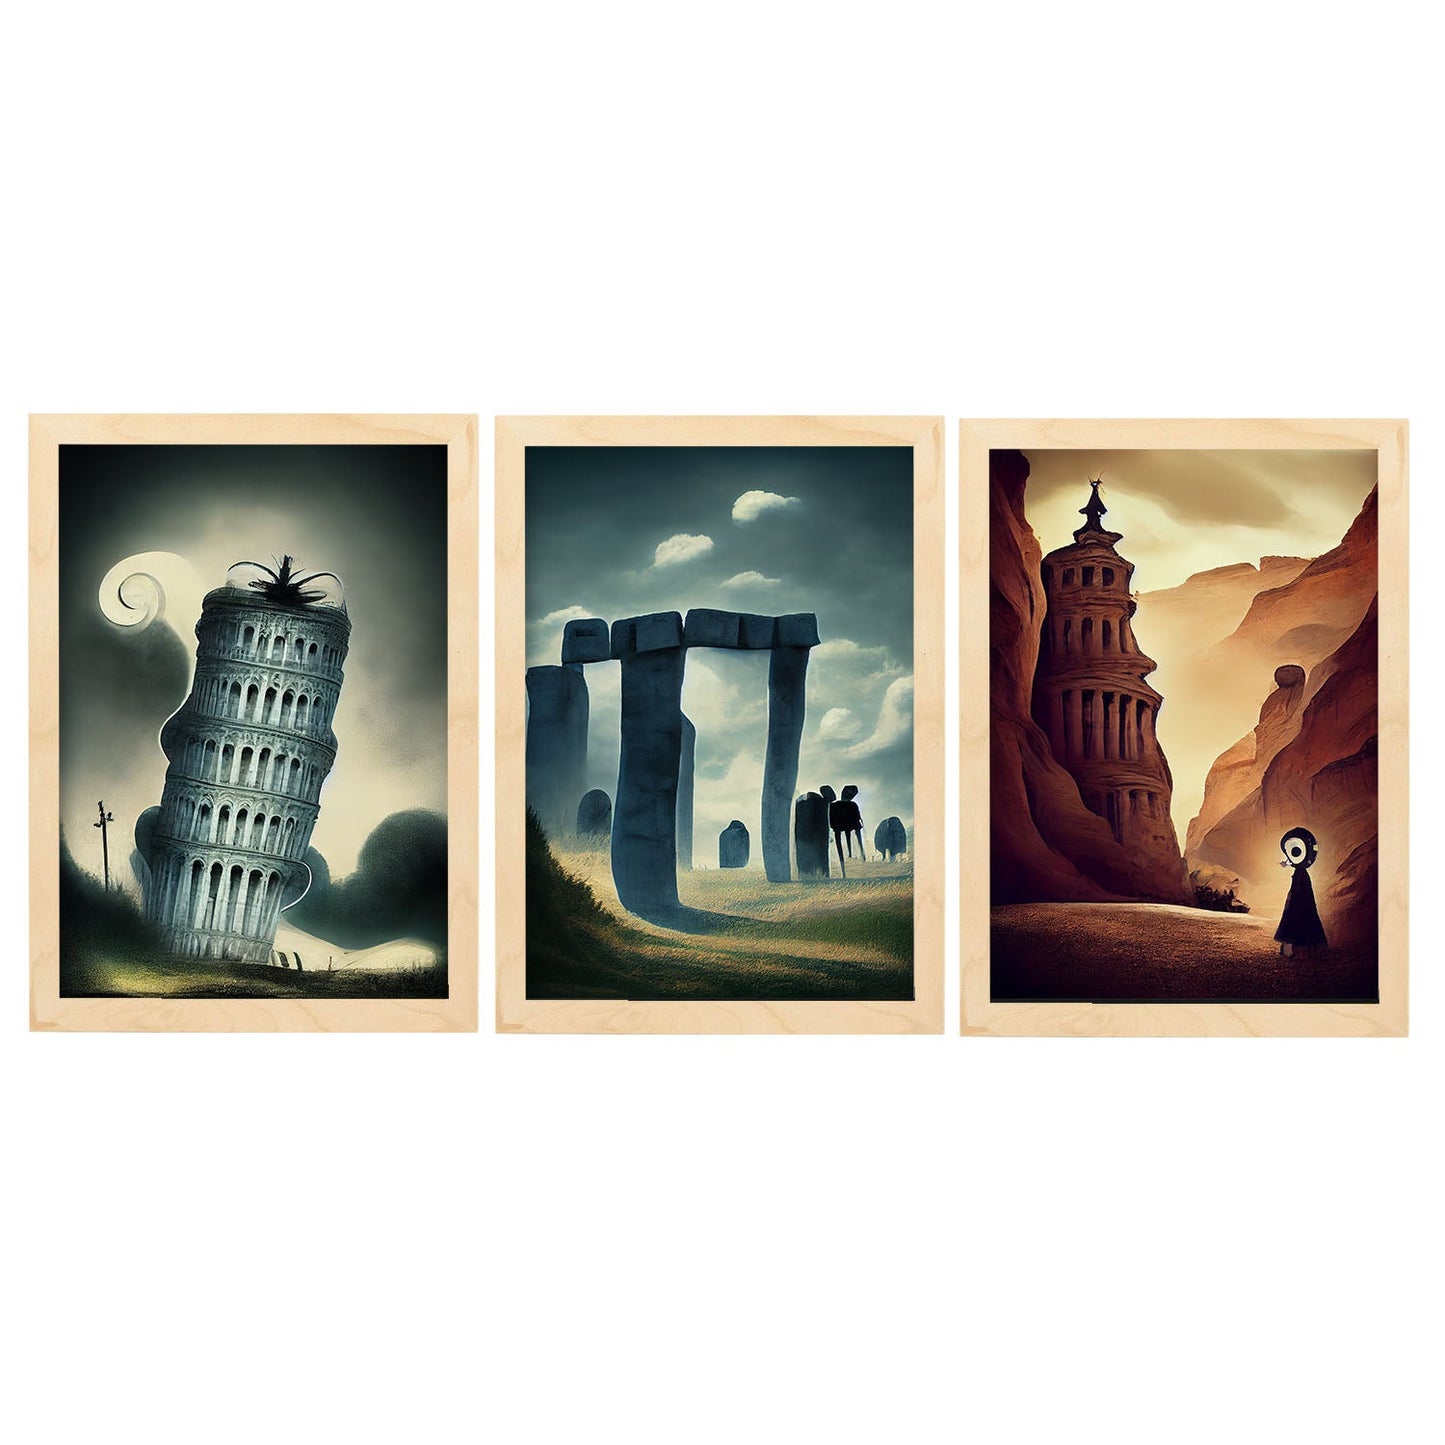 Burton style Illustrations of monuments and cities inspired by Burton's Dark and Goth art Interior Design and Decoration Set Collection 1-Artwork-Nacnic-A4-Marco Madera clara-Nacnic Estudio SL